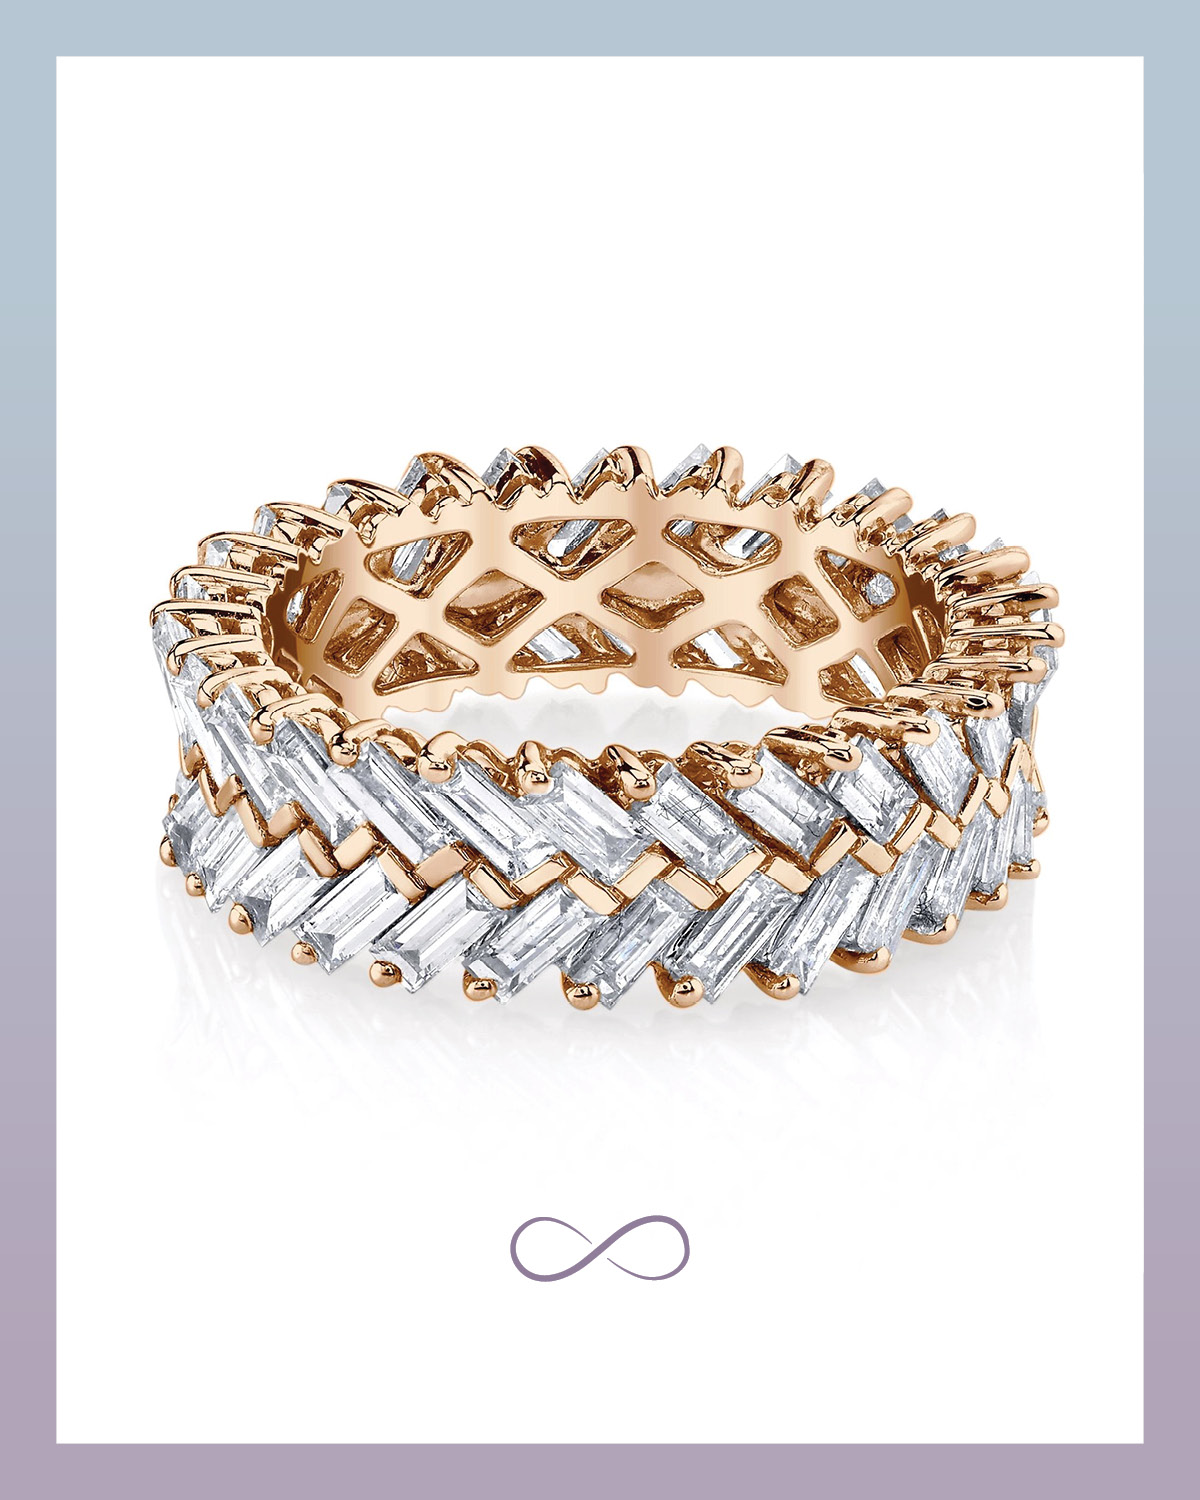 Baguette diamond eternity band in a zipper ring design from Anita Ko set in yellow gold